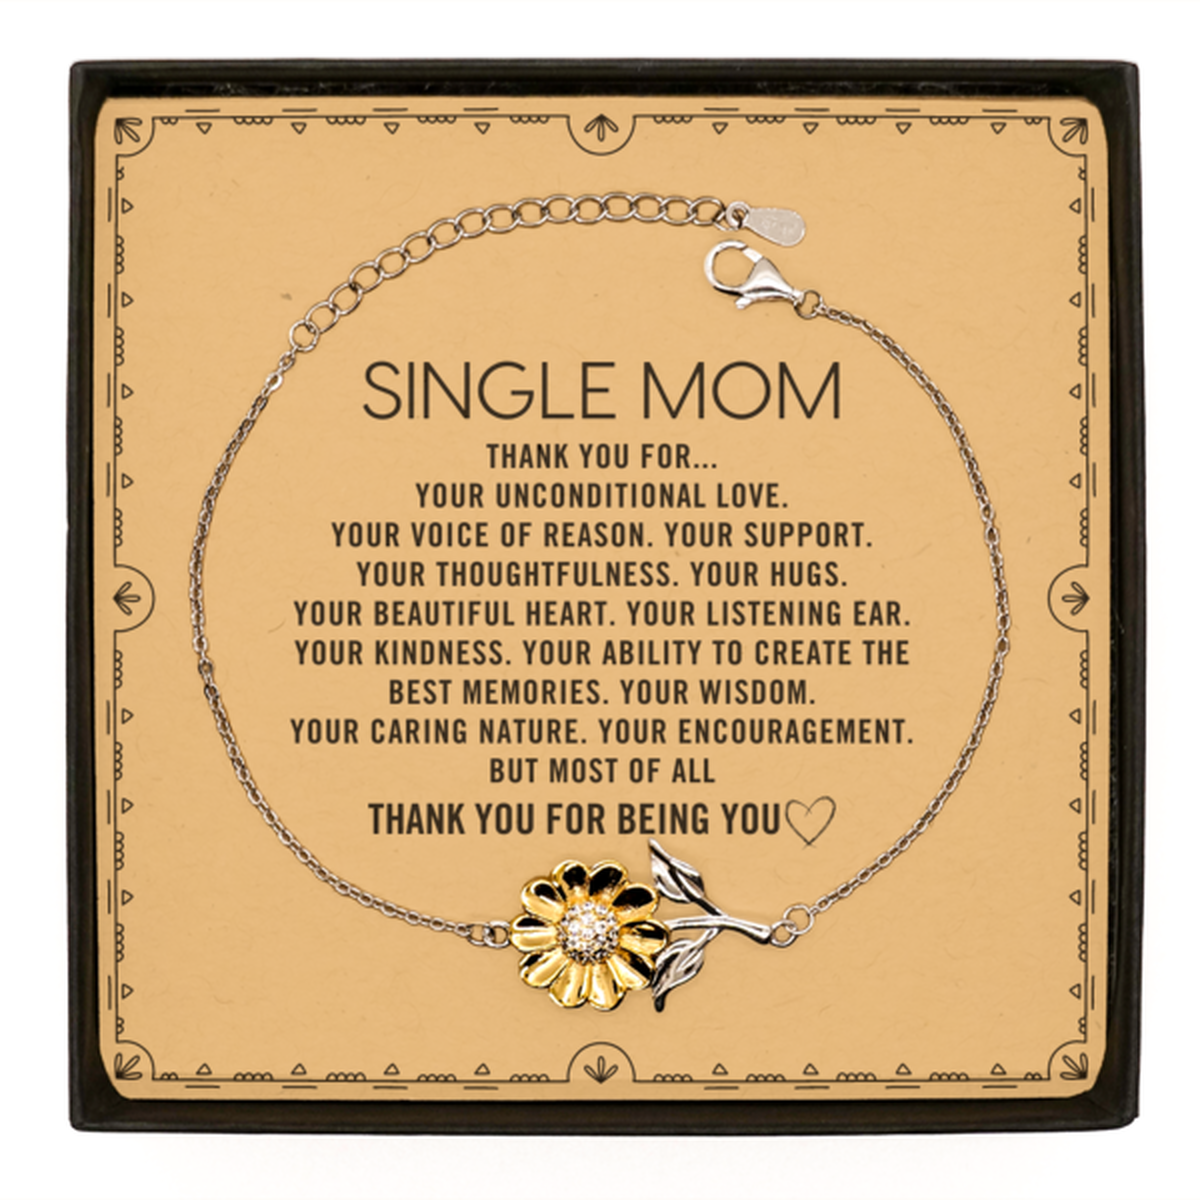 Single Mom Sunflower Bracelet Custom, Message Card Gifts For Single Mom Christmas Graduation Birthday Gifts for Men Women Single Mom Thank you for Your unconditional love